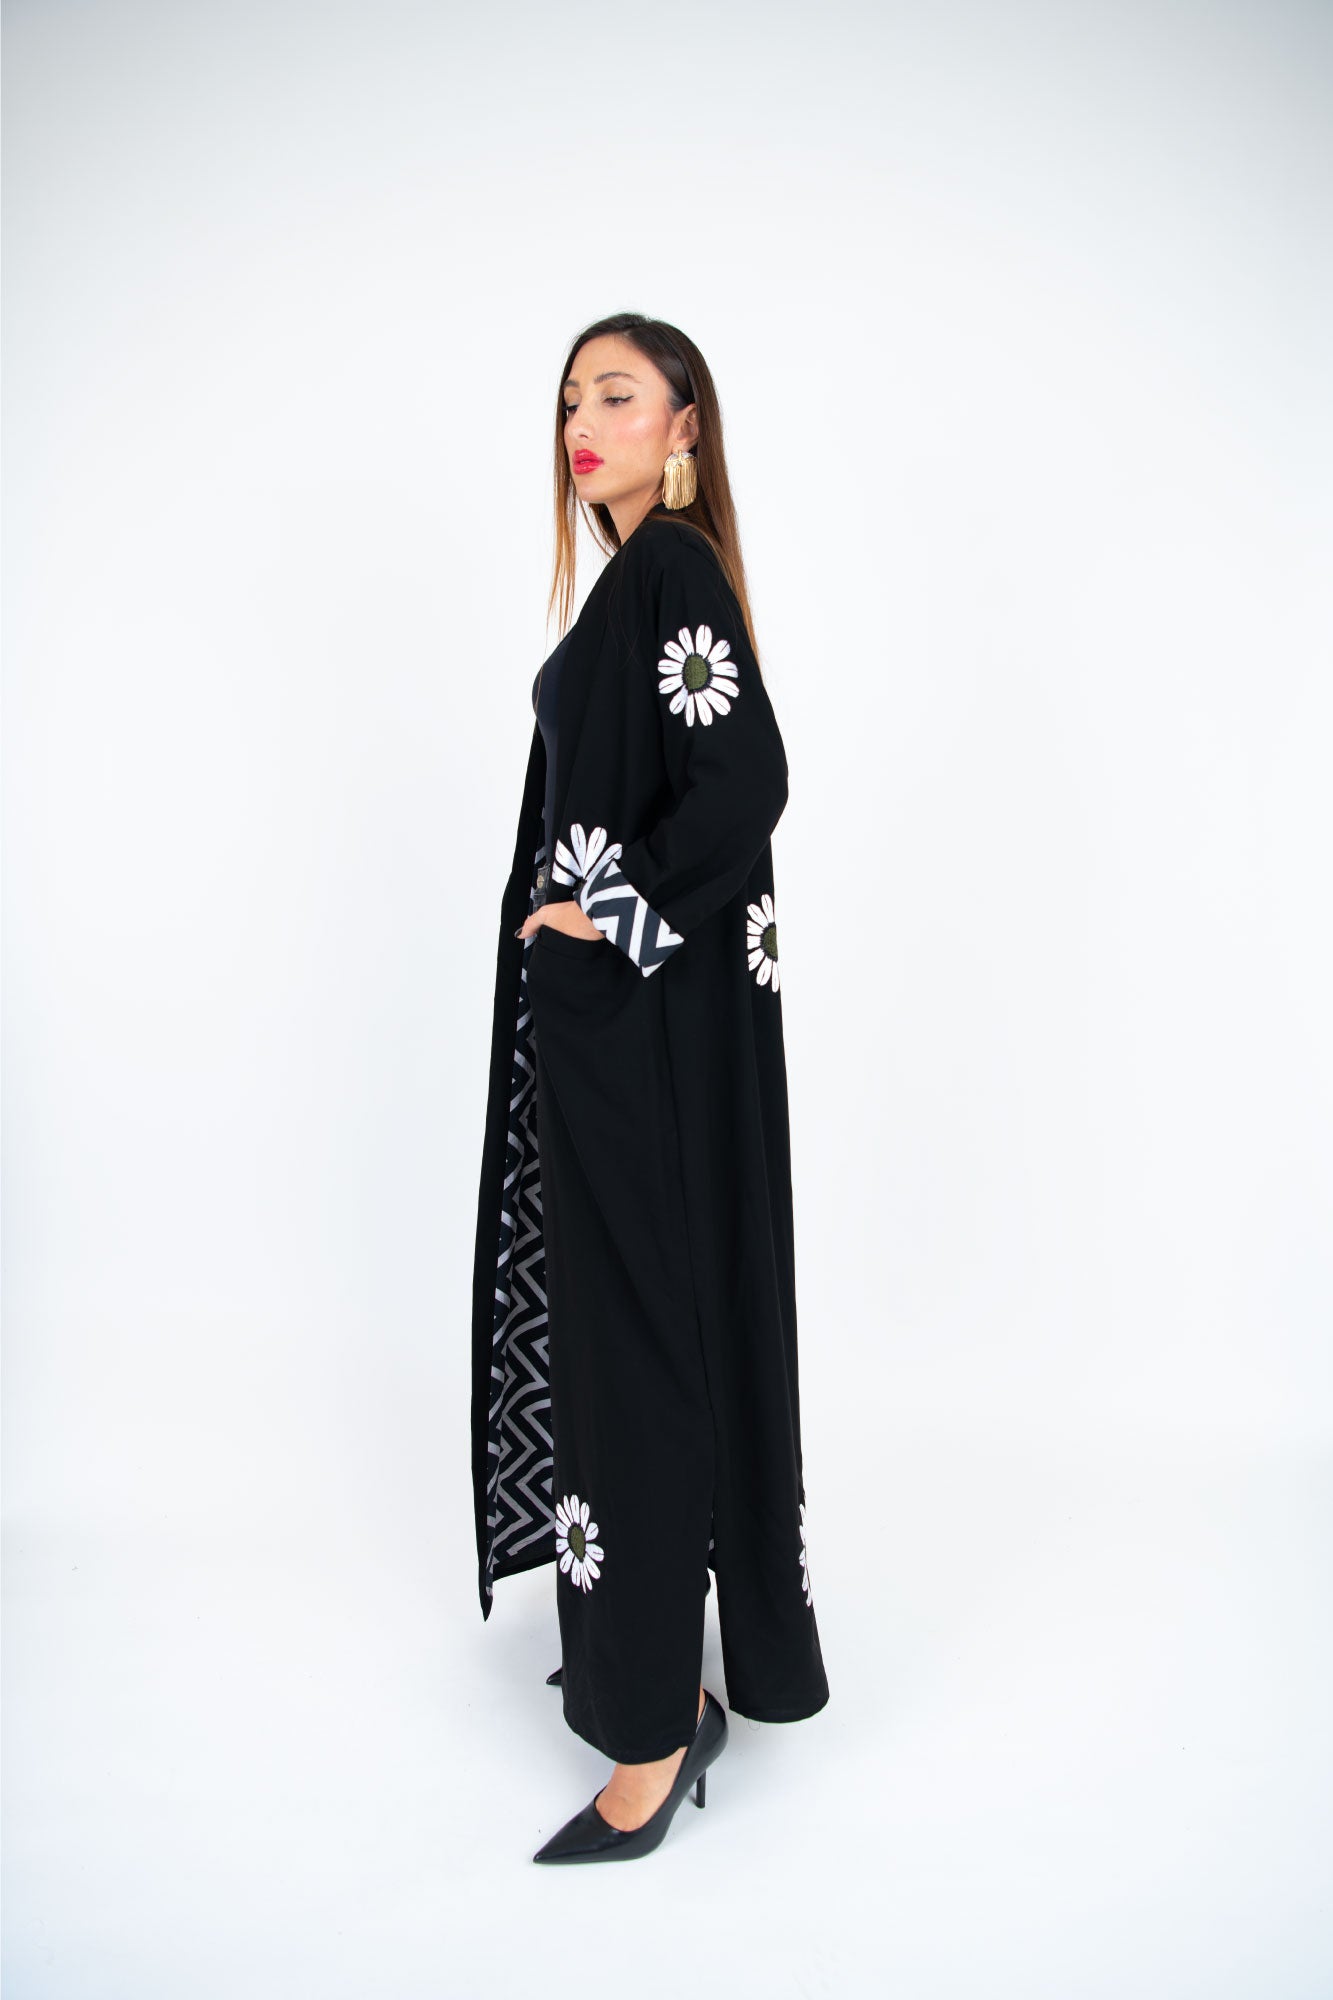 Black Crepe Abaya with White Daisy Accents